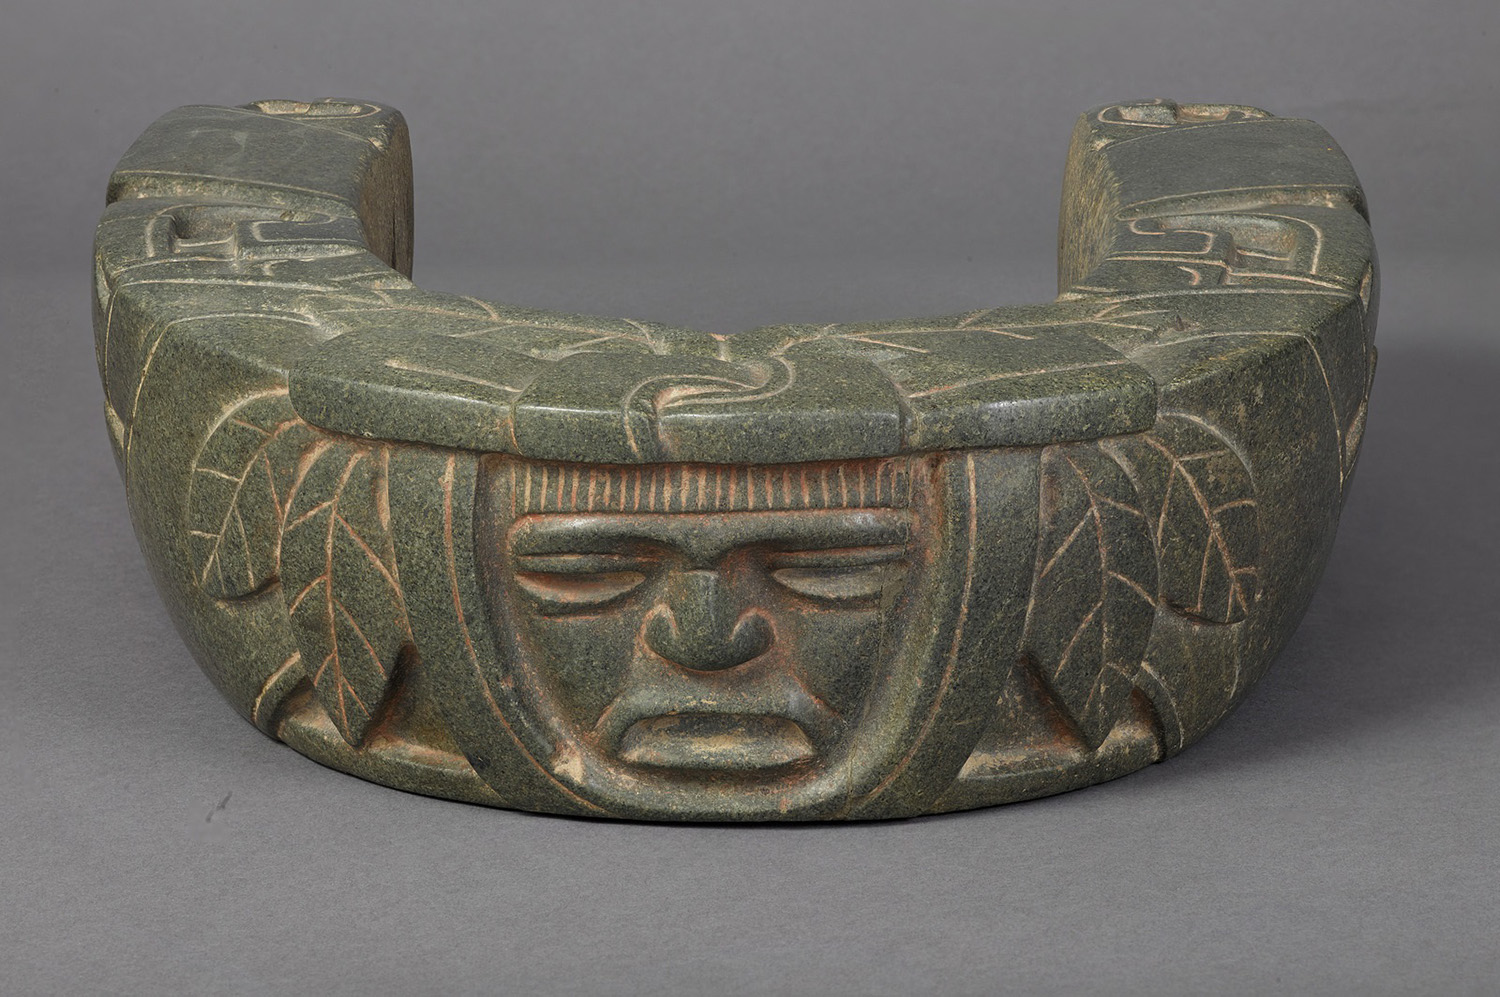 Greenstone yoke with human faces carved on it.